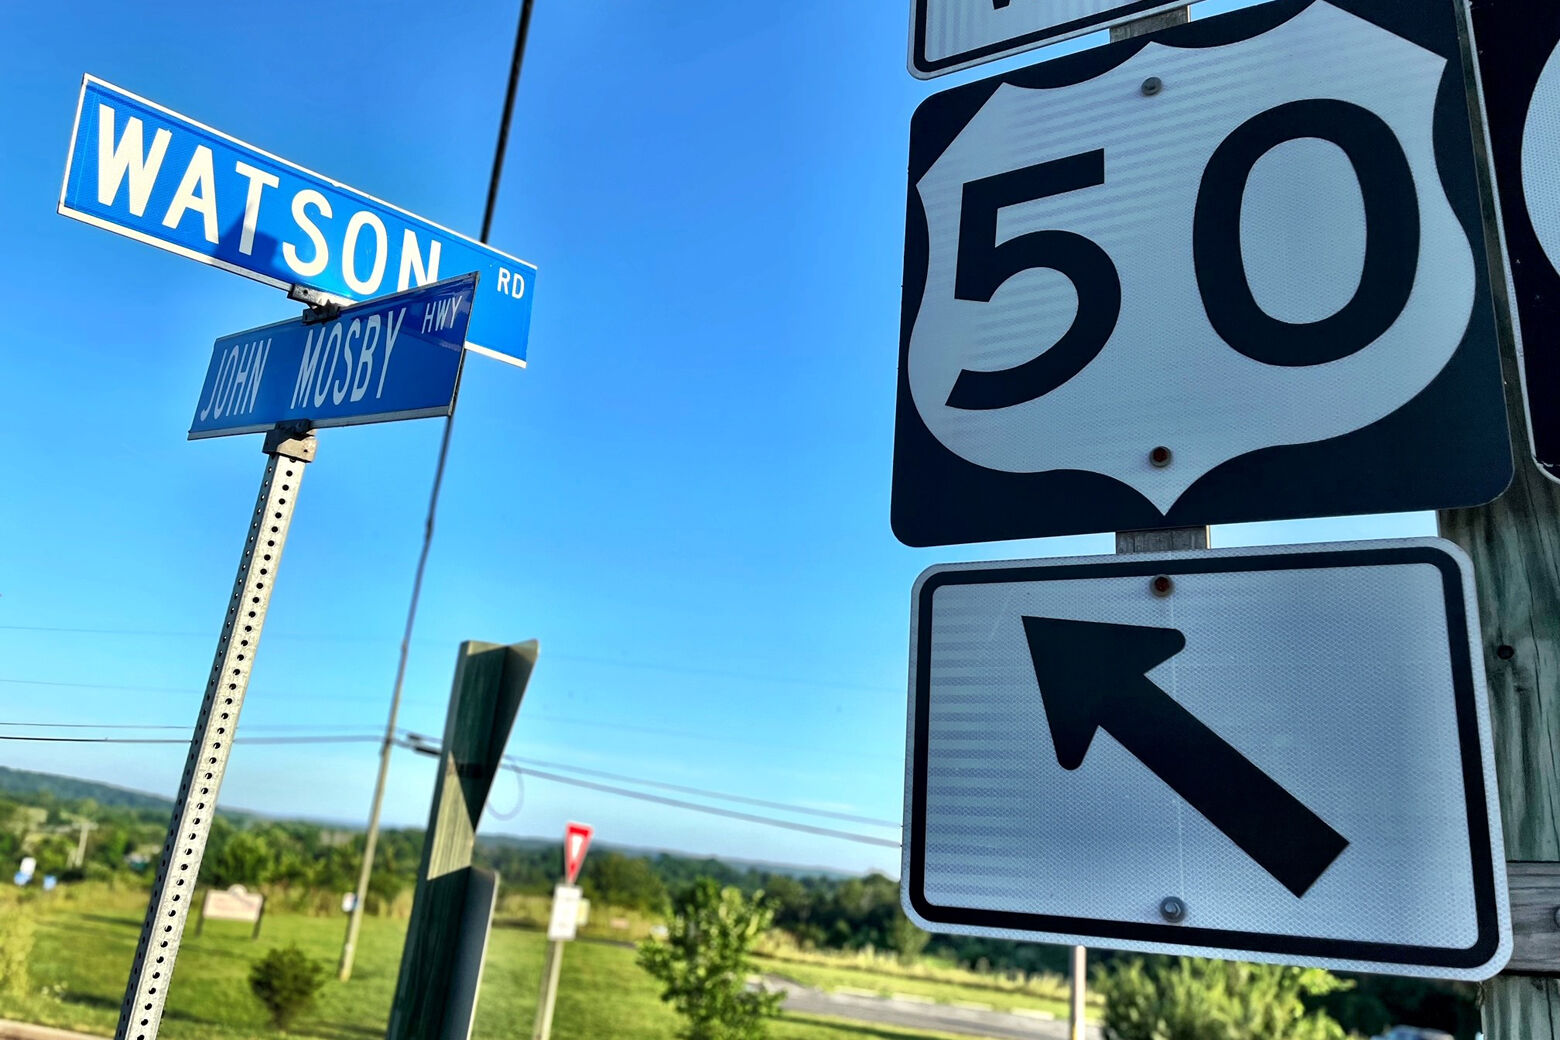 U.S. 50 has been known as John Mosby Highway